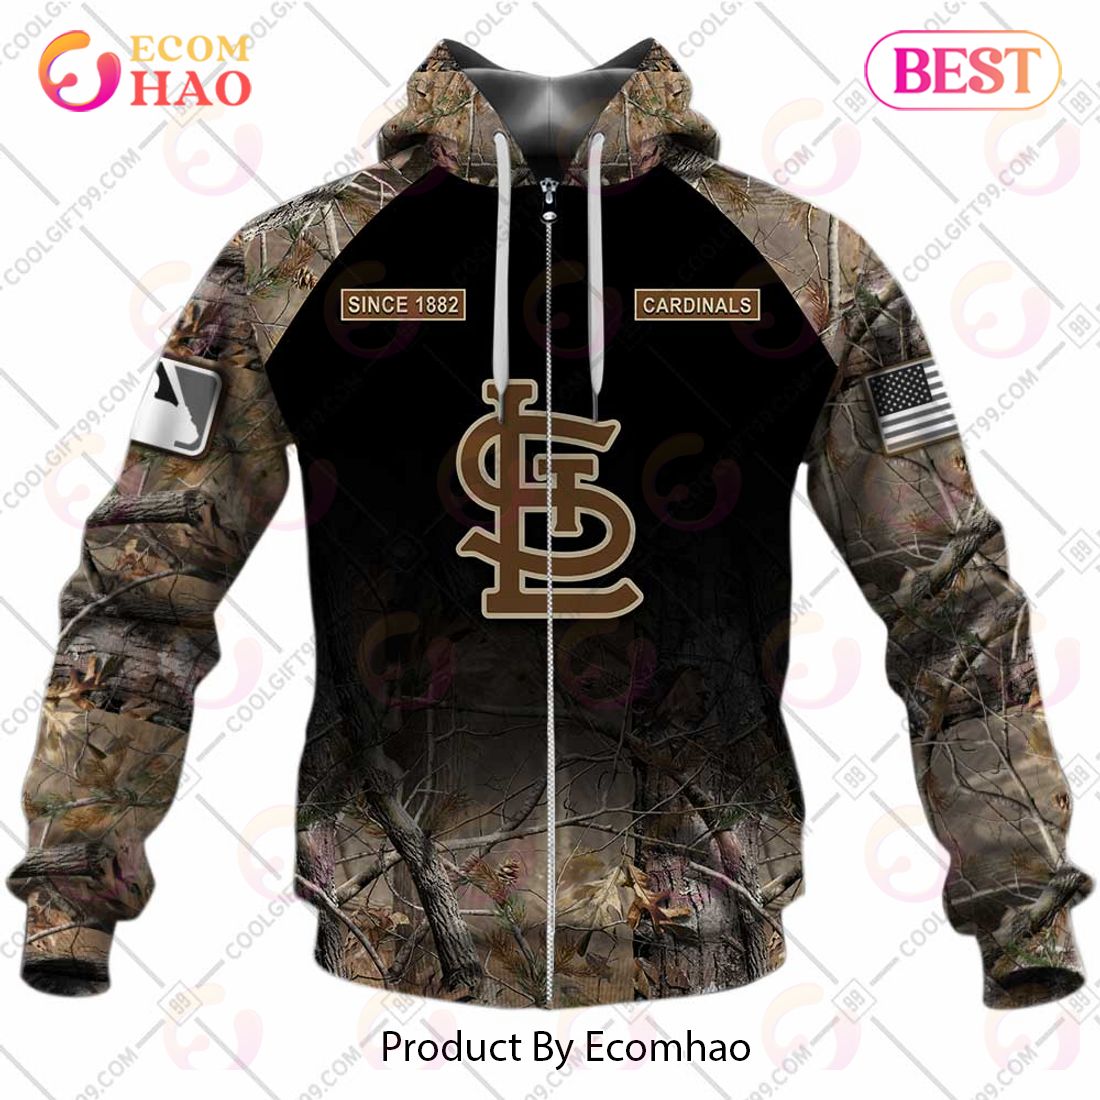 ST.Louis Cardinals MLB Personalized Hunting Camouflage Hoodie T